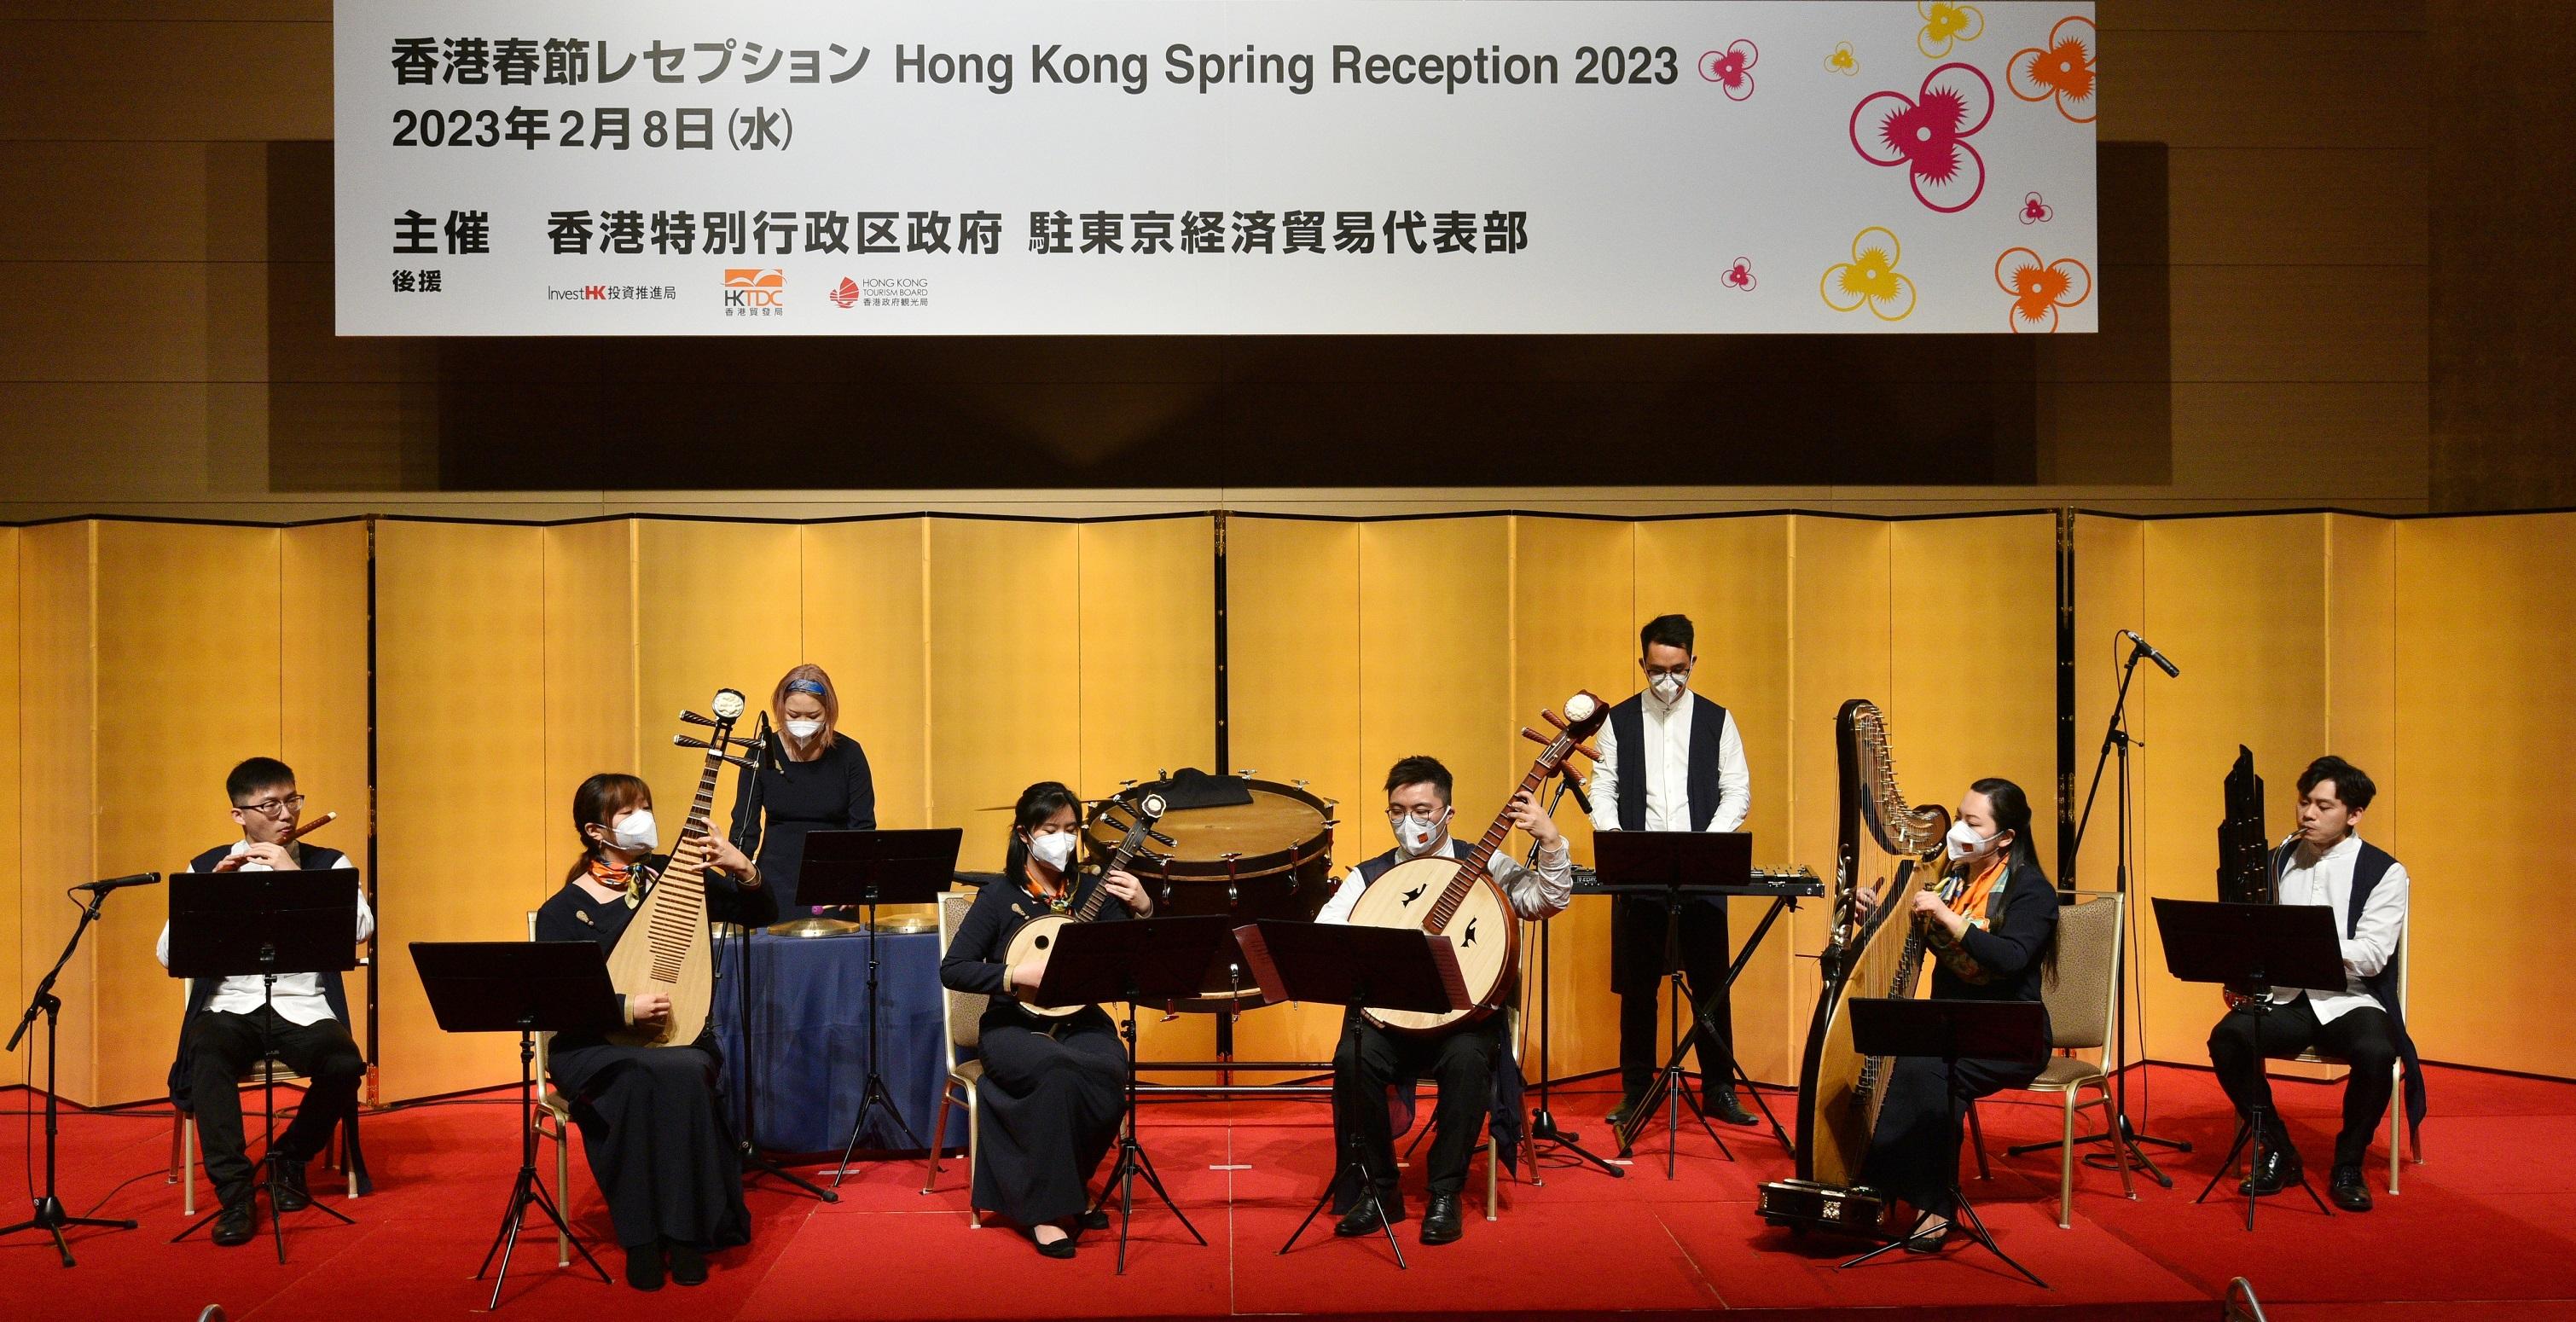 Hong Kong Gaudeamus Dunhuang Ensemble performs at the spring reception held by the Hong Kong Economic and Trade Office (Tokyo) today (February 8).